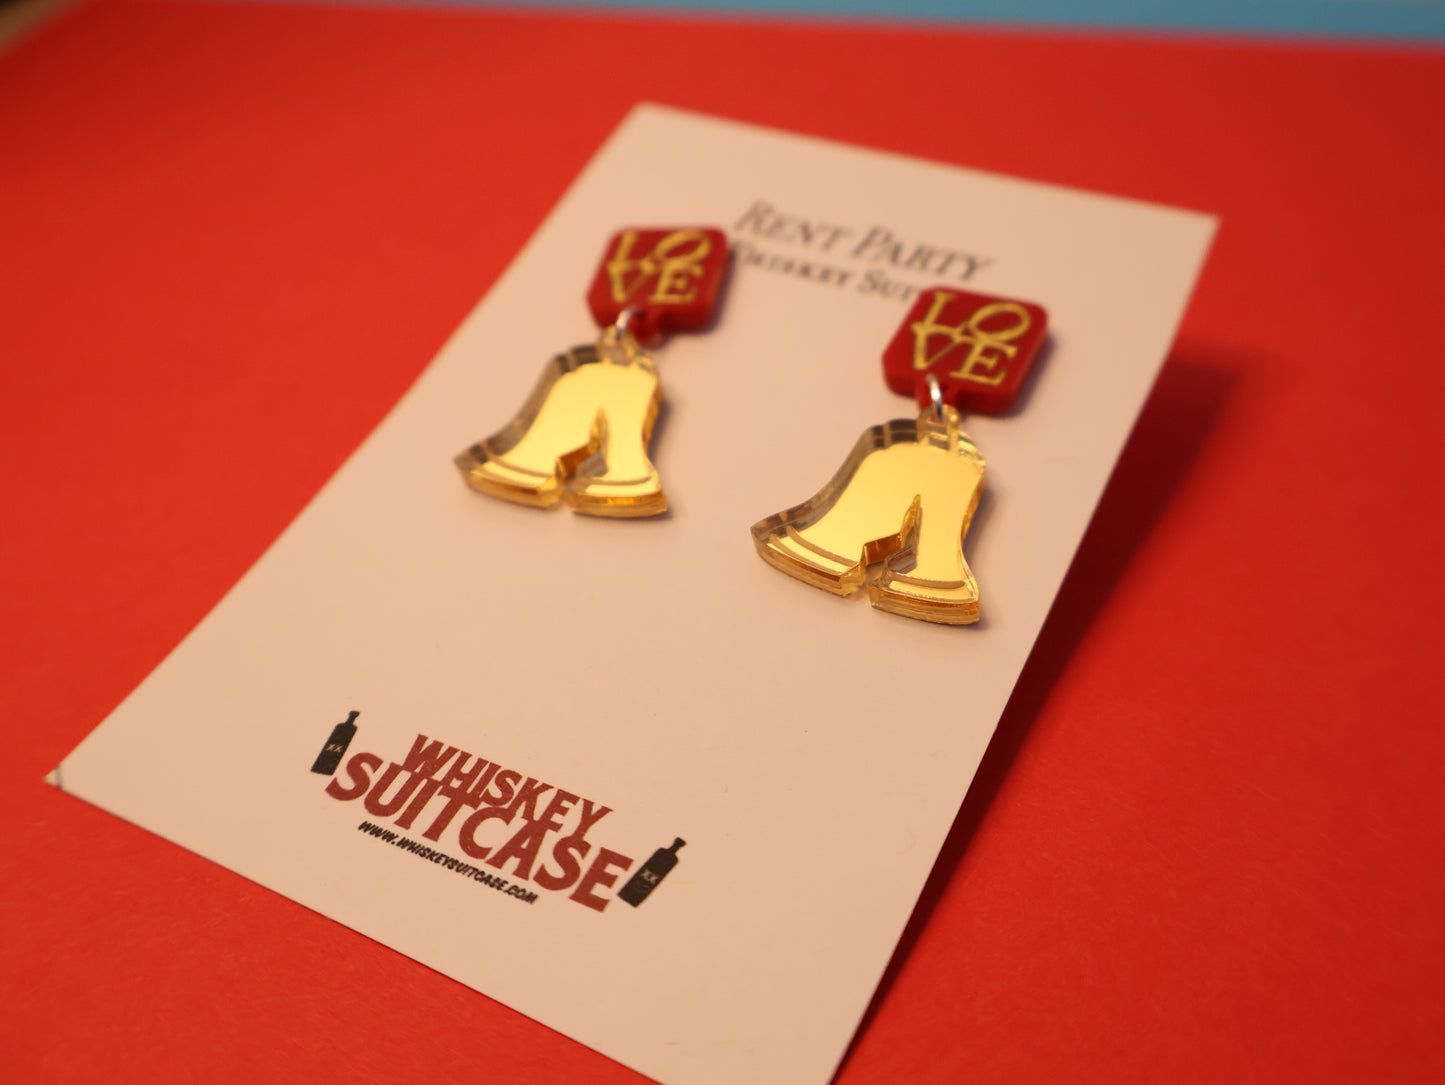 Philadelphia Love & Liberty Bell Earrings: Red w/Gold Mirror Bell | Lasercut Acrylic Jewelry | Mother's Day or Philly Teacher Gift